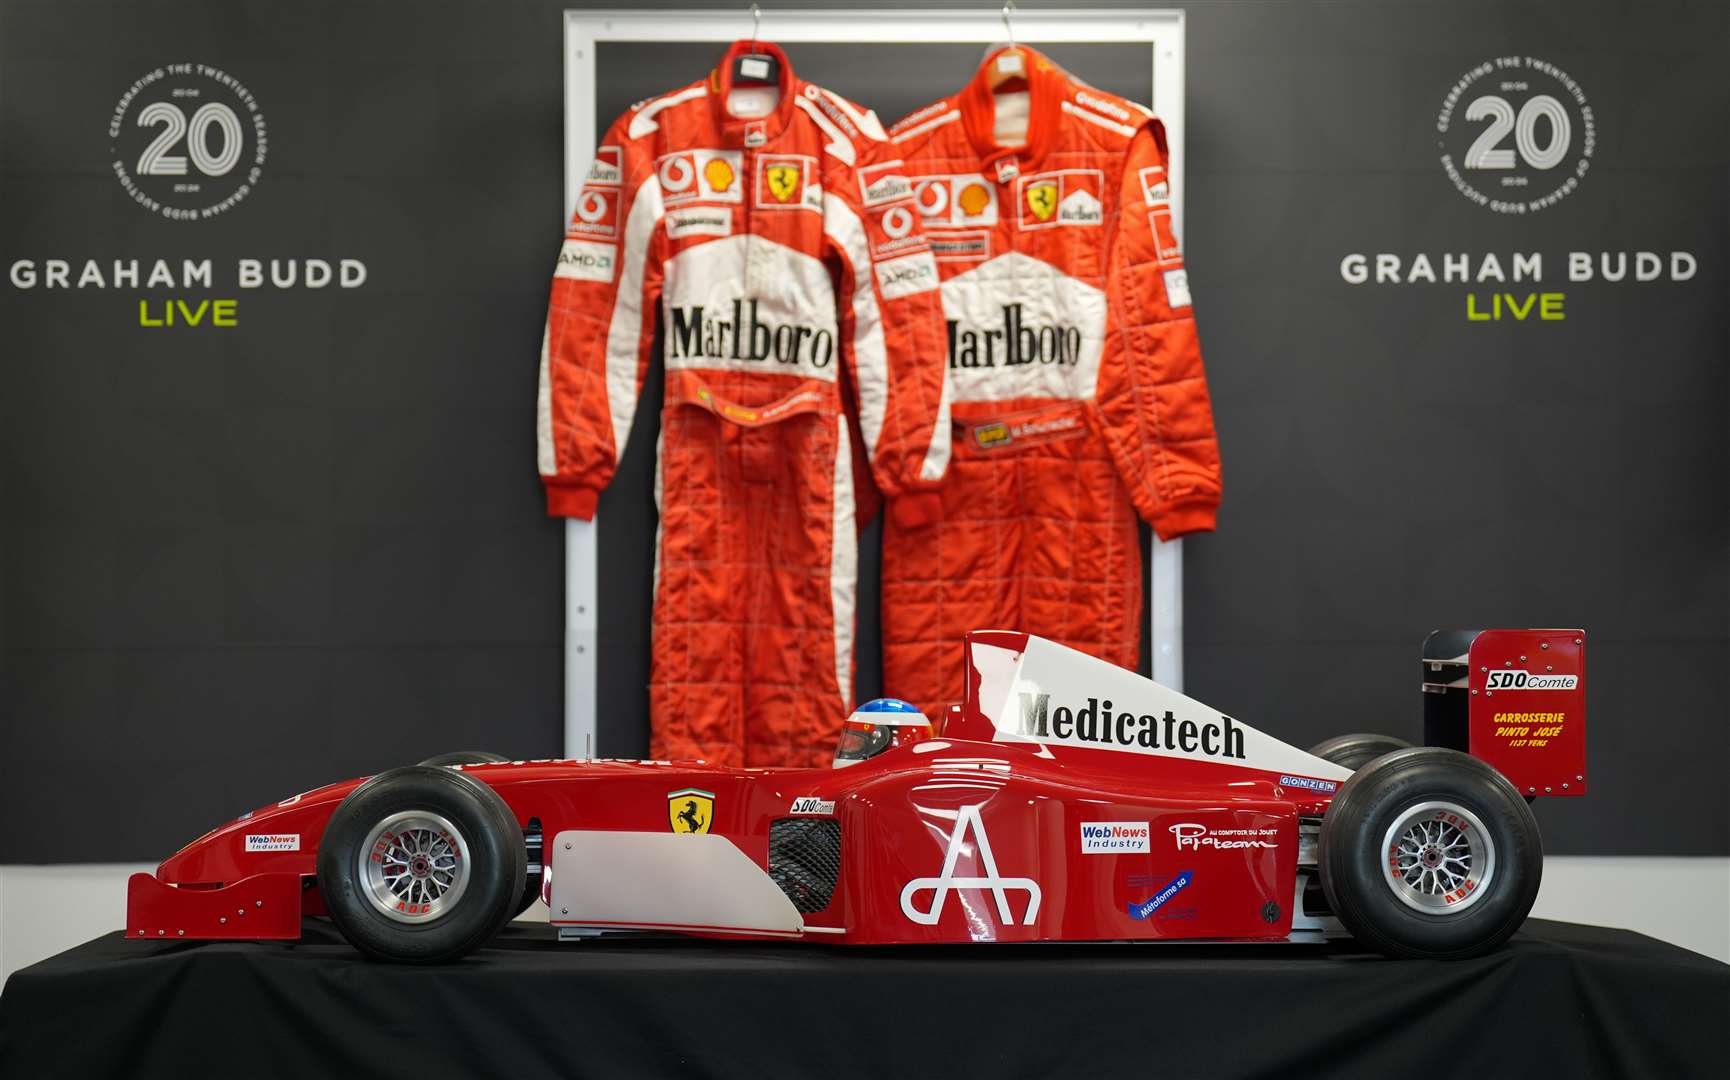 The 1:3 scale model of the F1 Ferrari F2002 will be sold alongside other motor racing memorabilia, including race suits (Joe Giddens/PA)